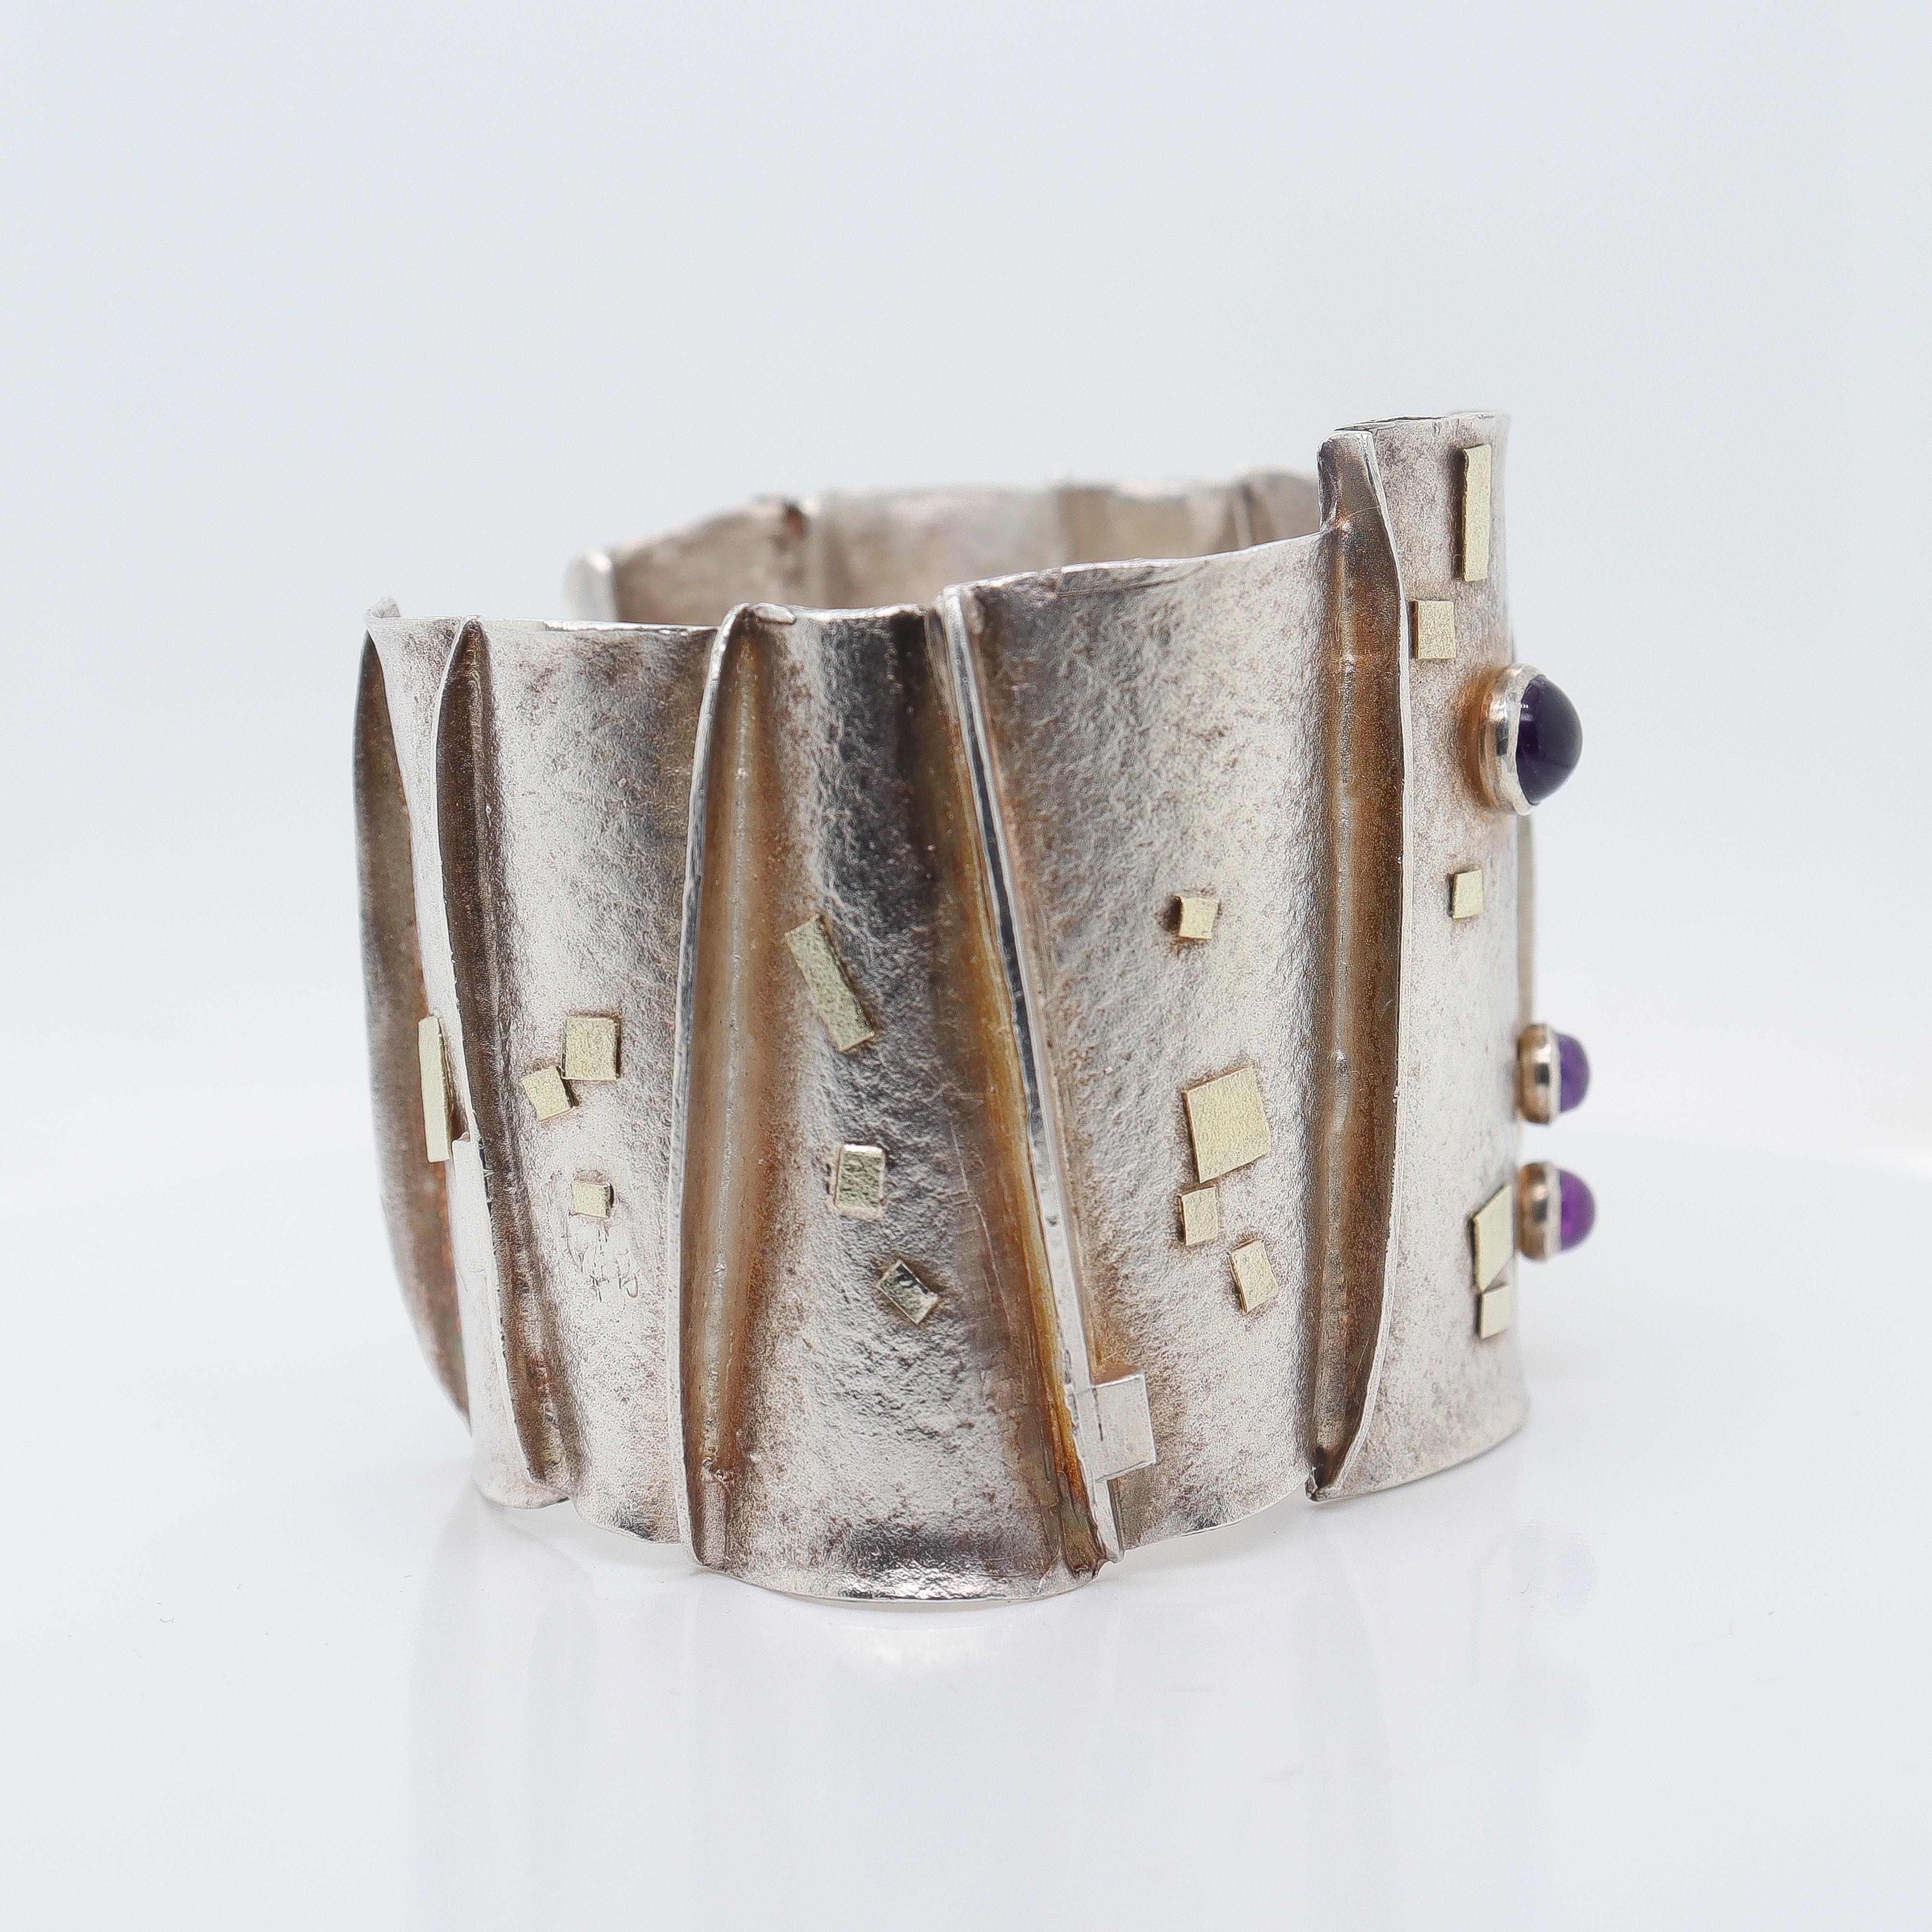 Cabochon Modernist Silver, Gold, & Amethyst Cuff Bracelet Attributed to Enid Kaplan For Sale